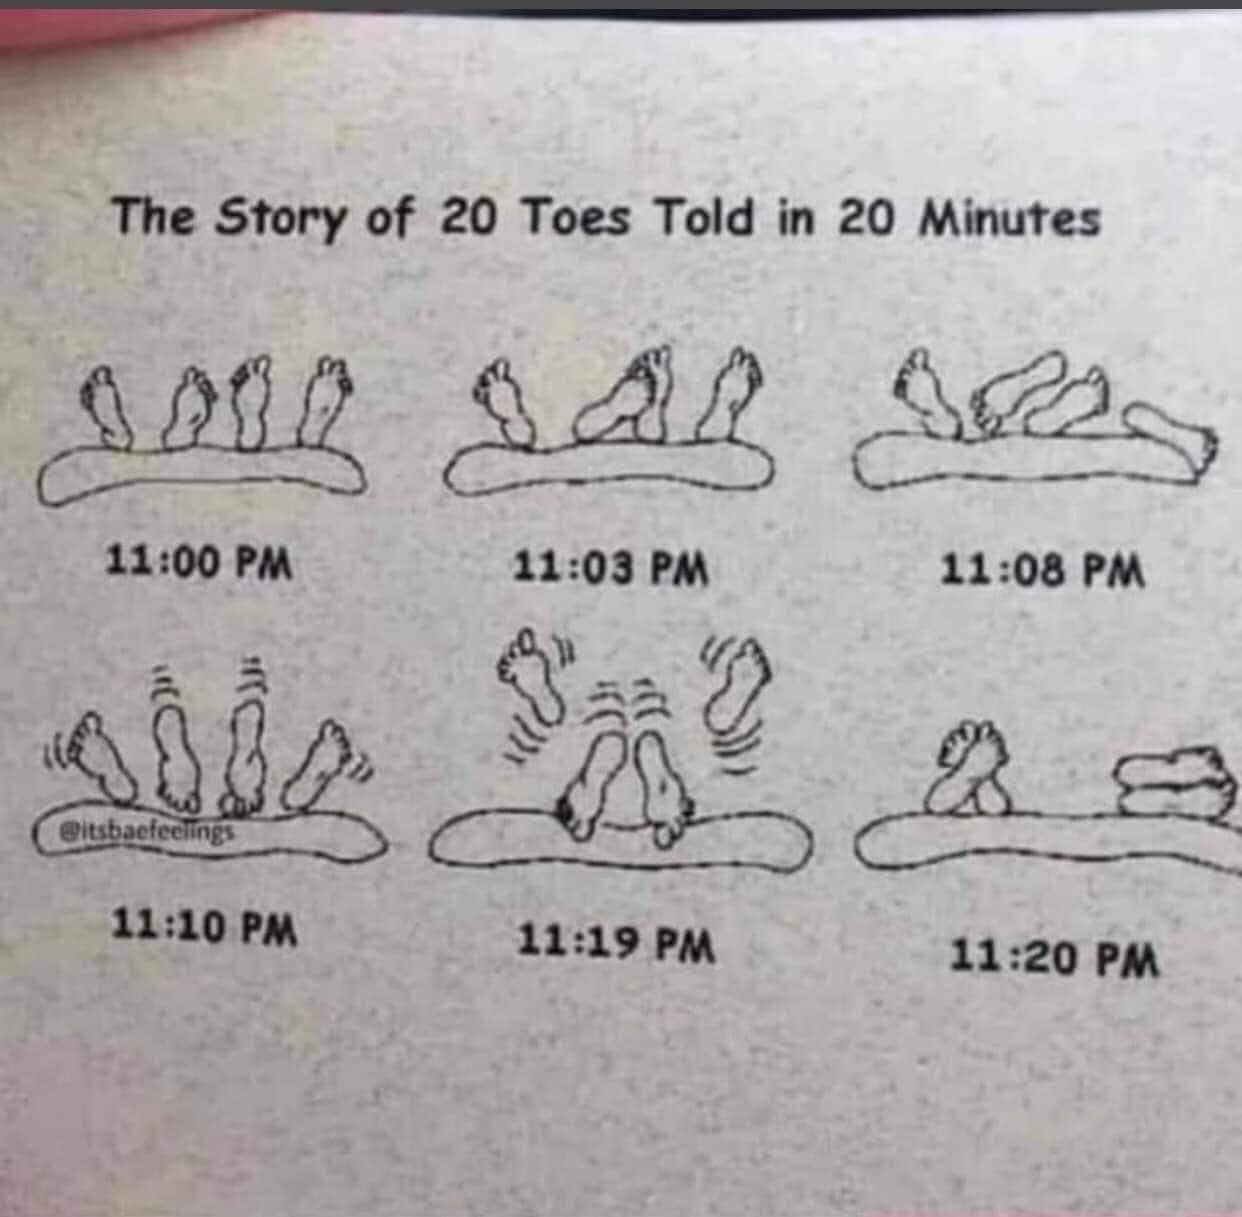 The story of 20 toes told in 20 minutes